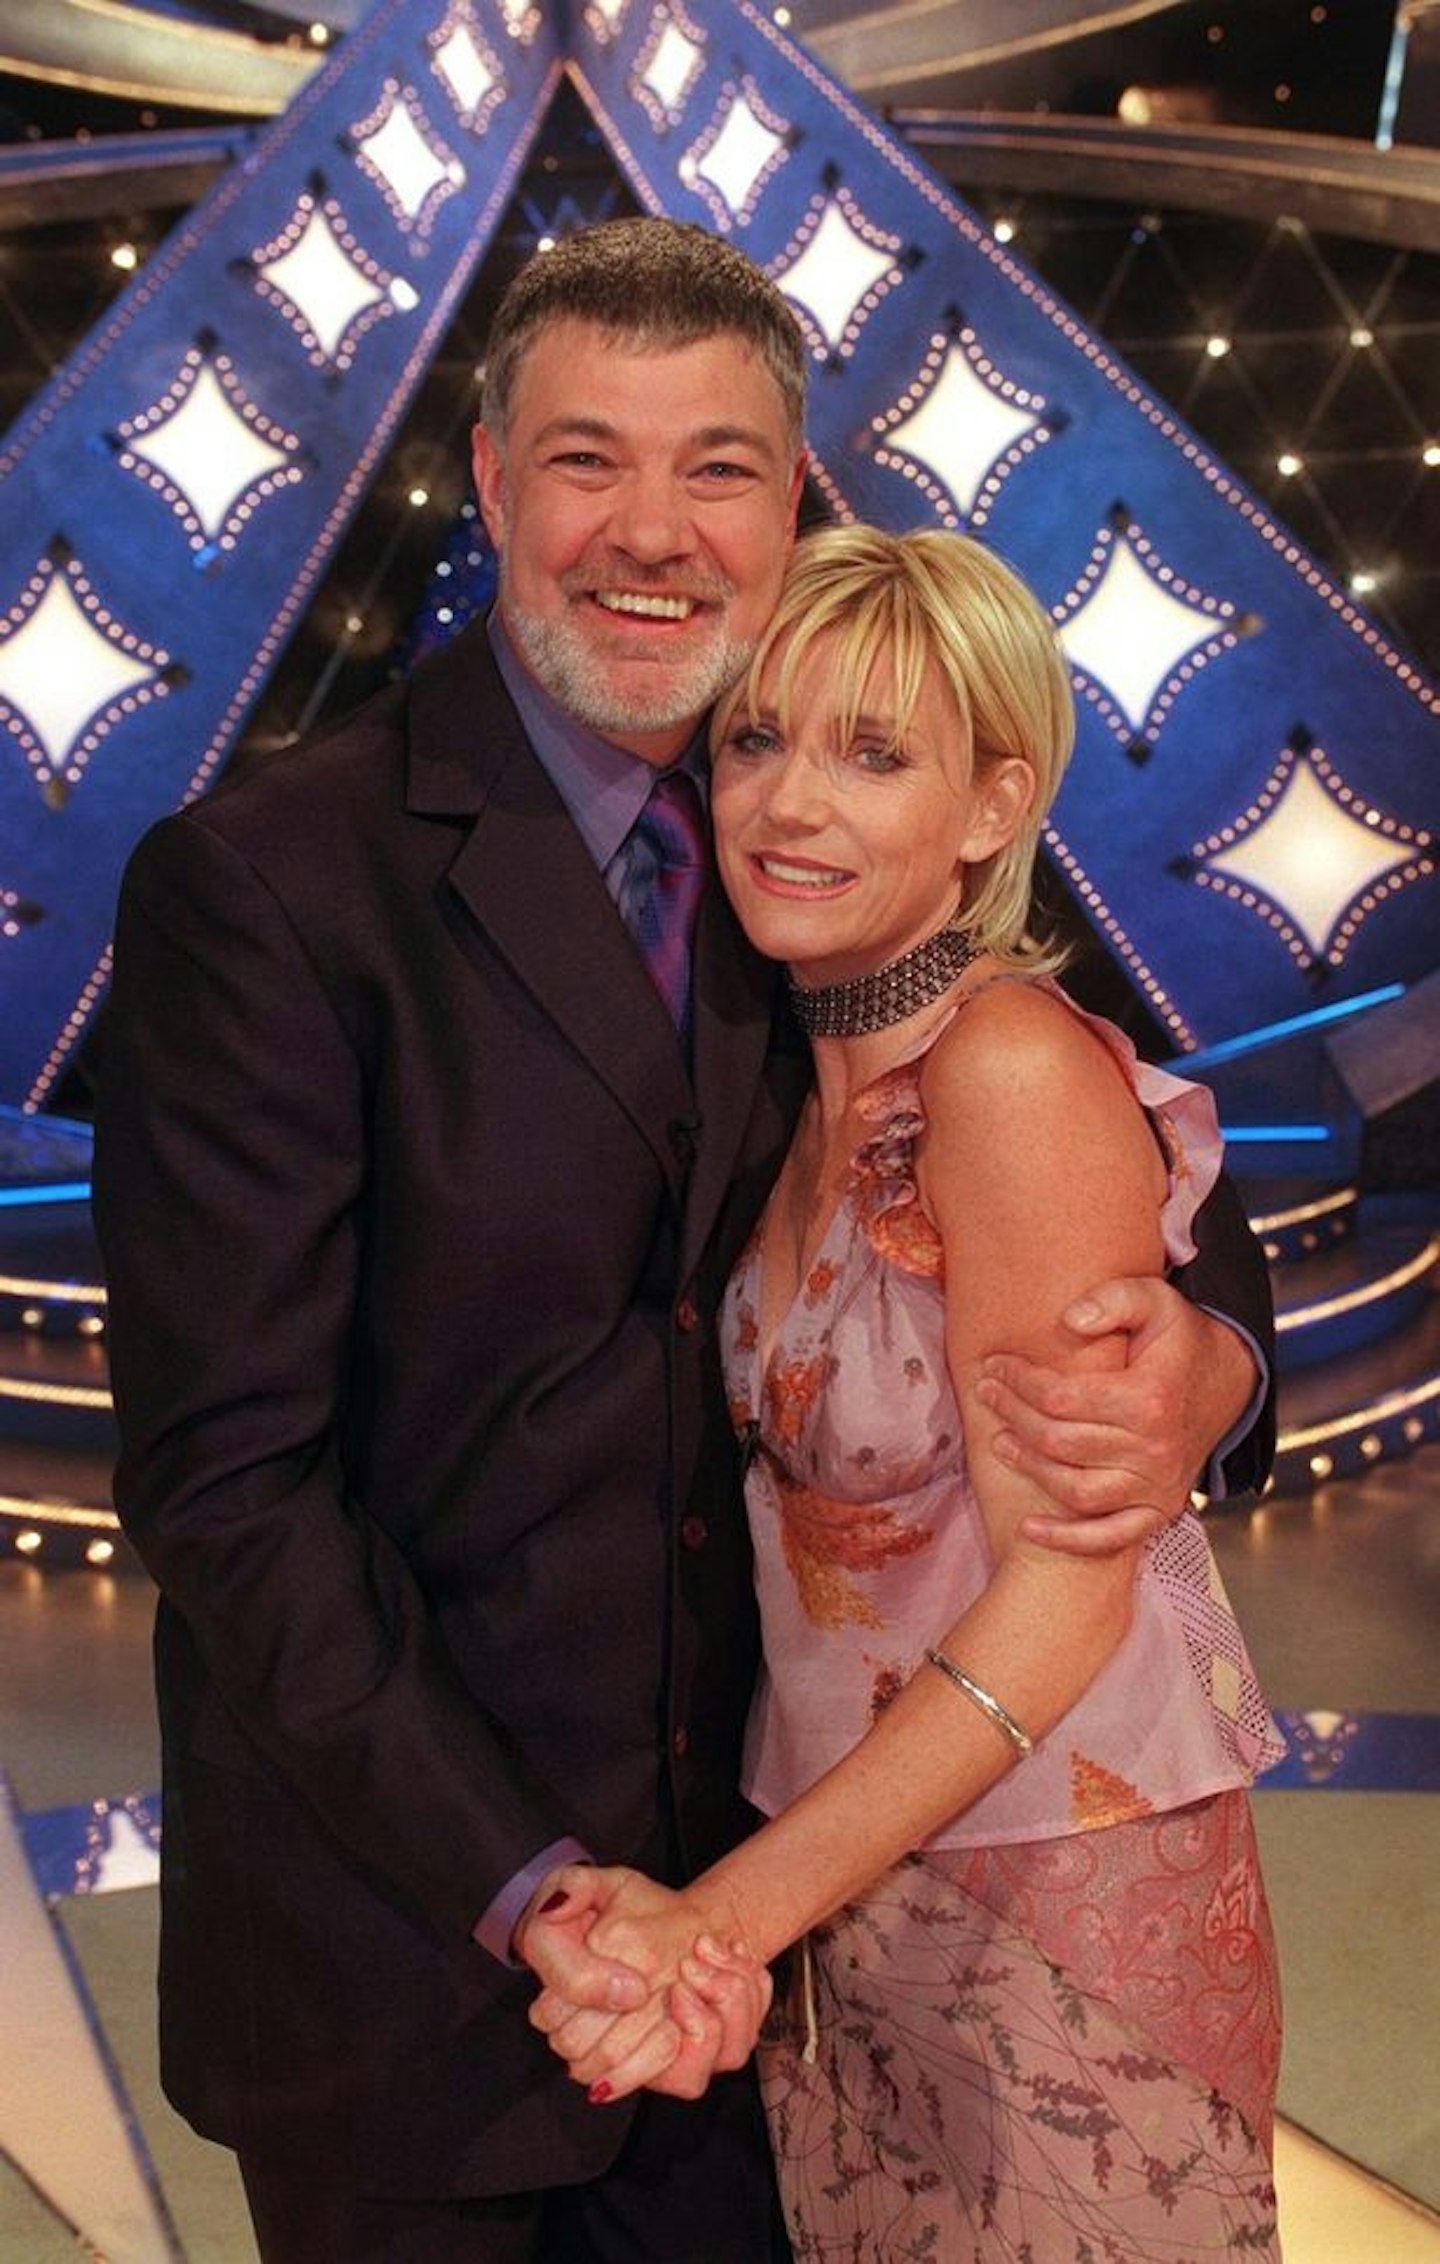 Matthew Kelly originally hosted the show